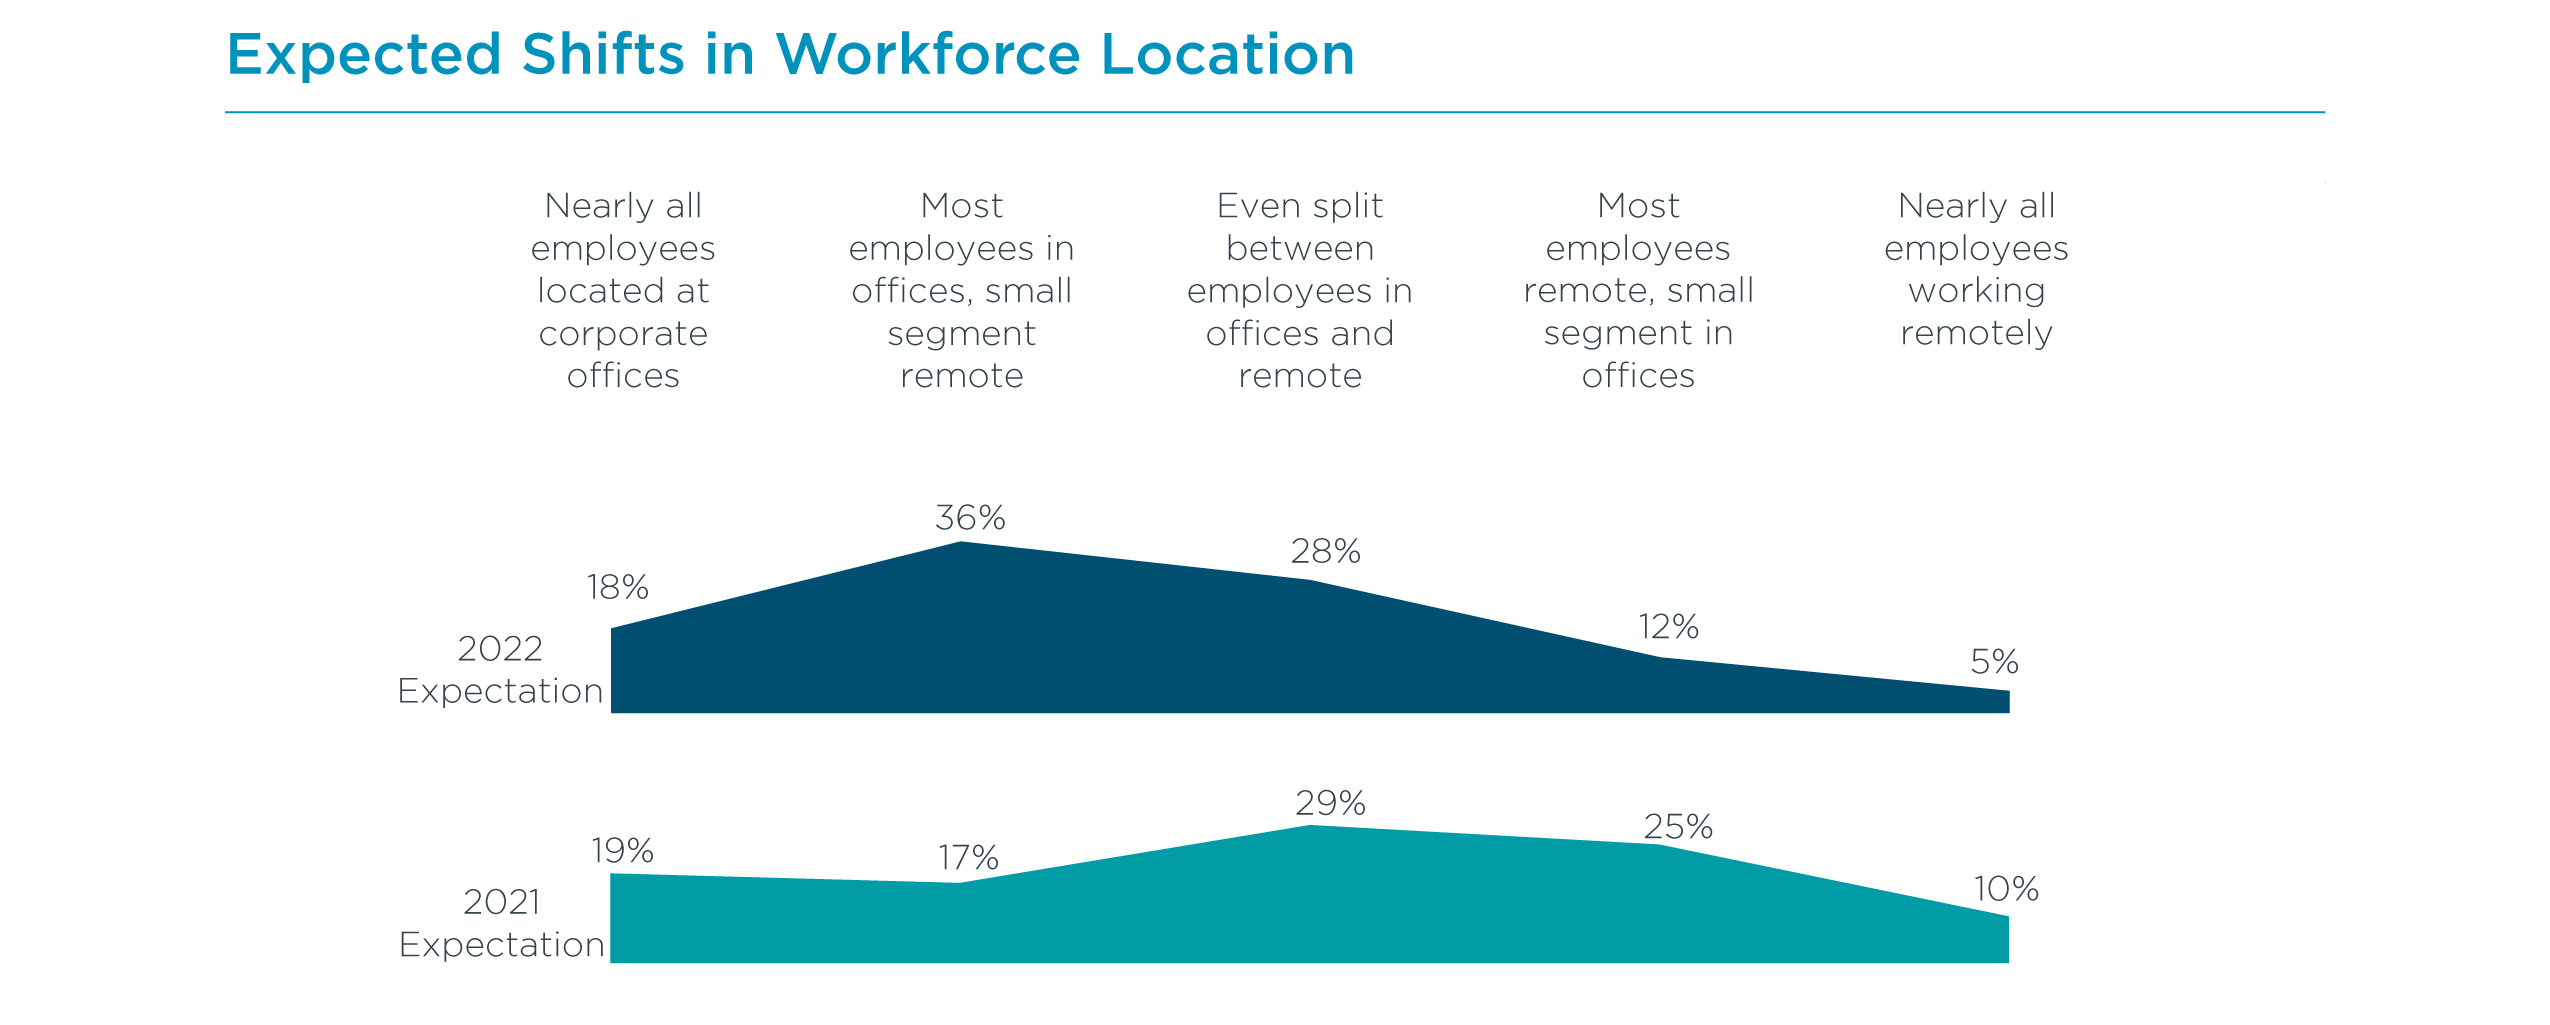 Expected Shifts in Workforce Location